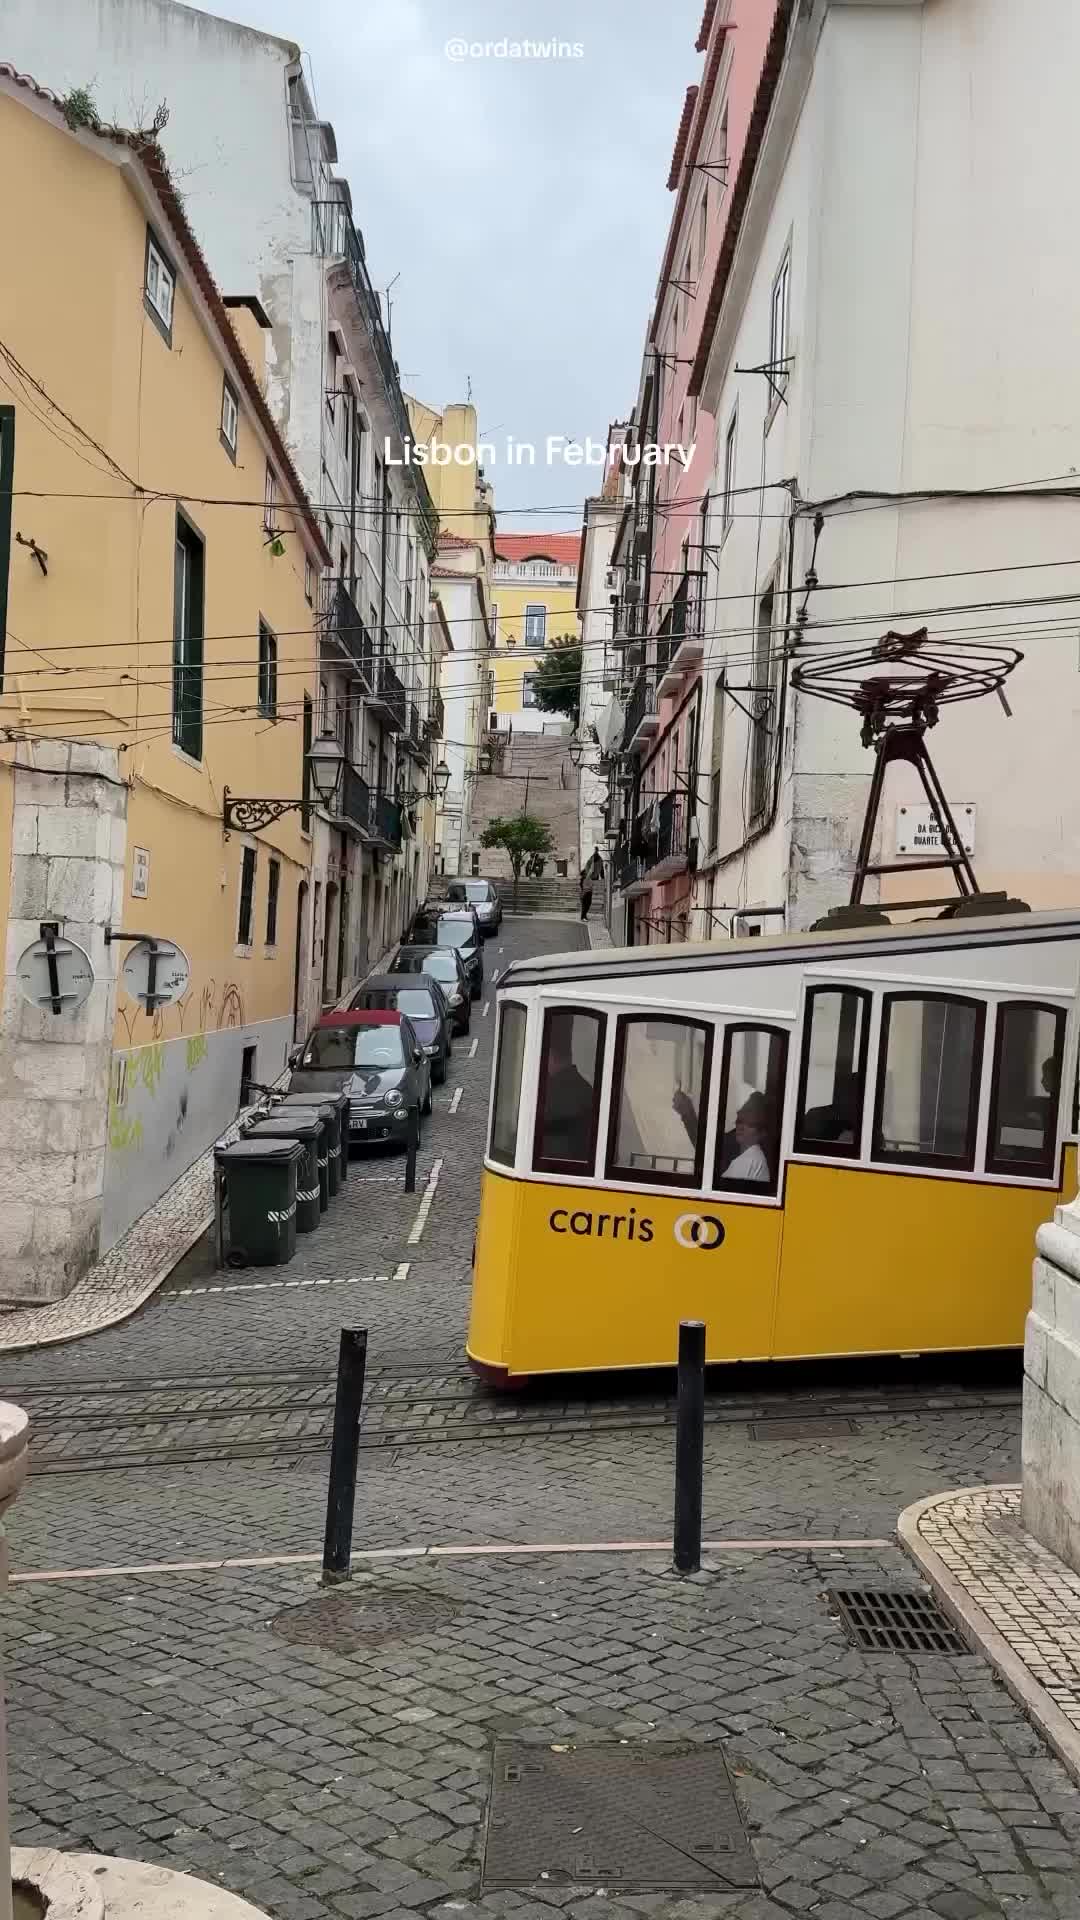 Discover Lisbon in February: Top Attractions & Hidden Gems